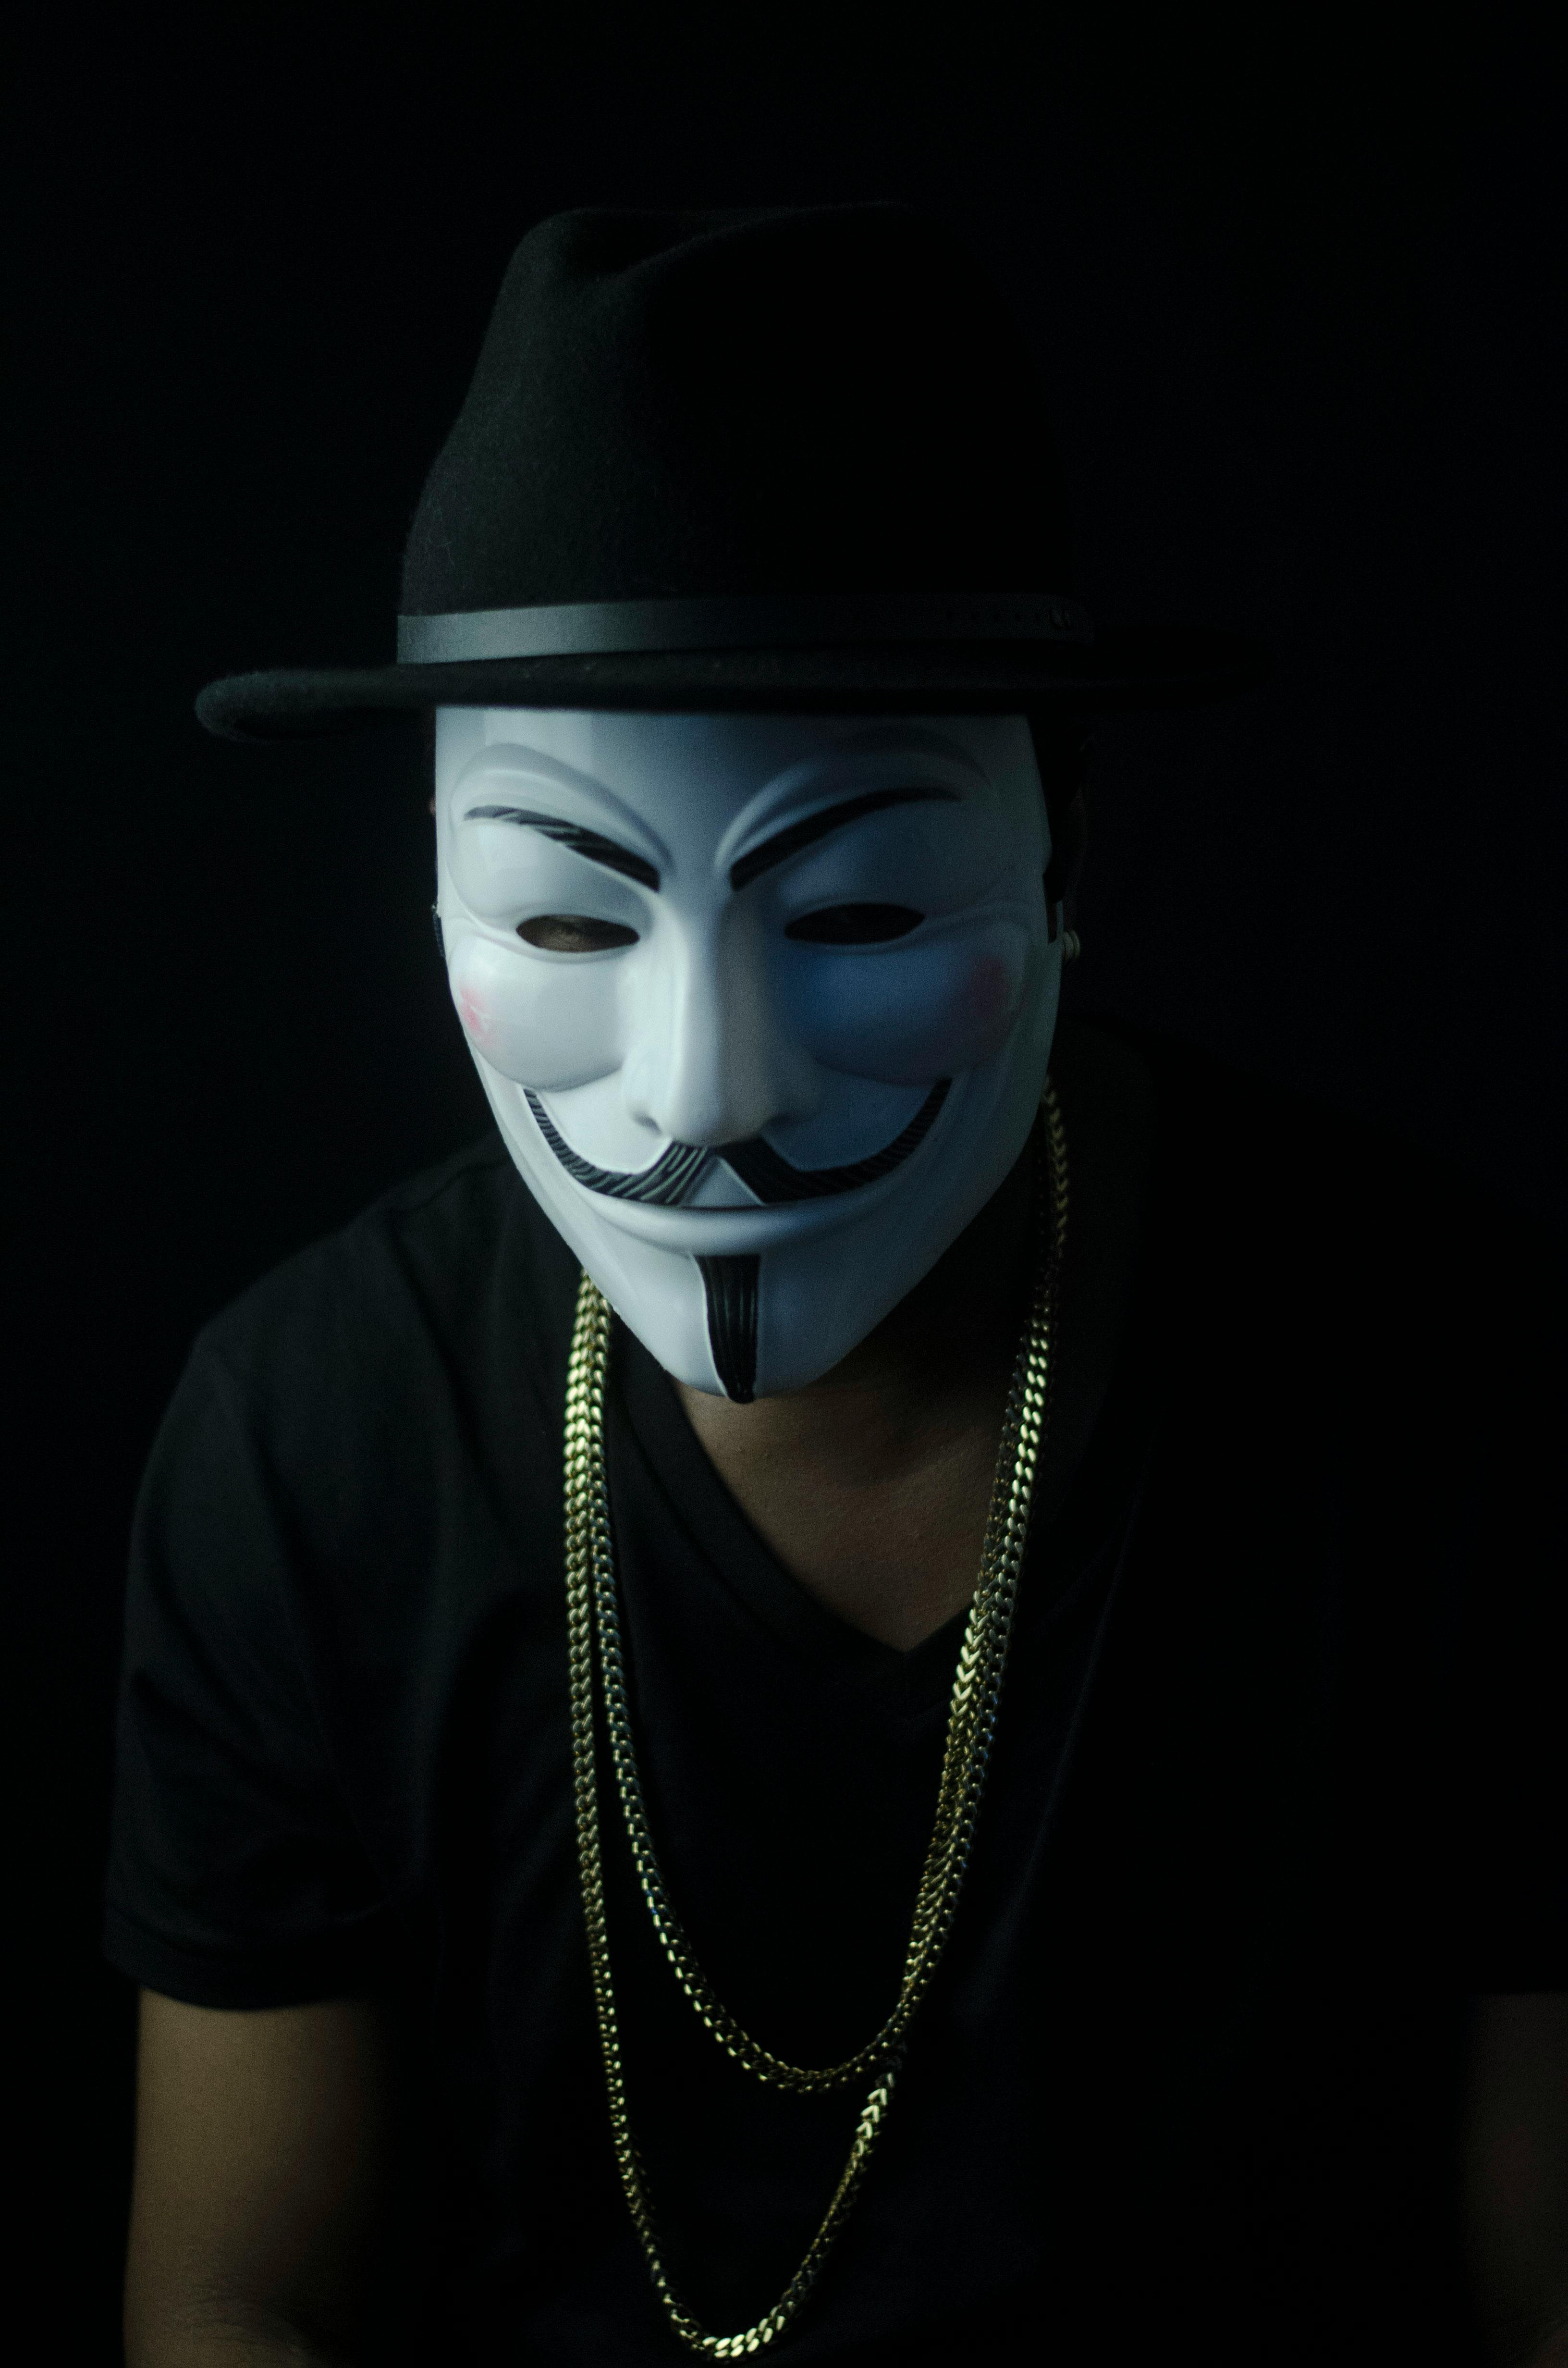 🔥 Anonymous Laptop Wallpaper Screen Background Full HD | PngBackground